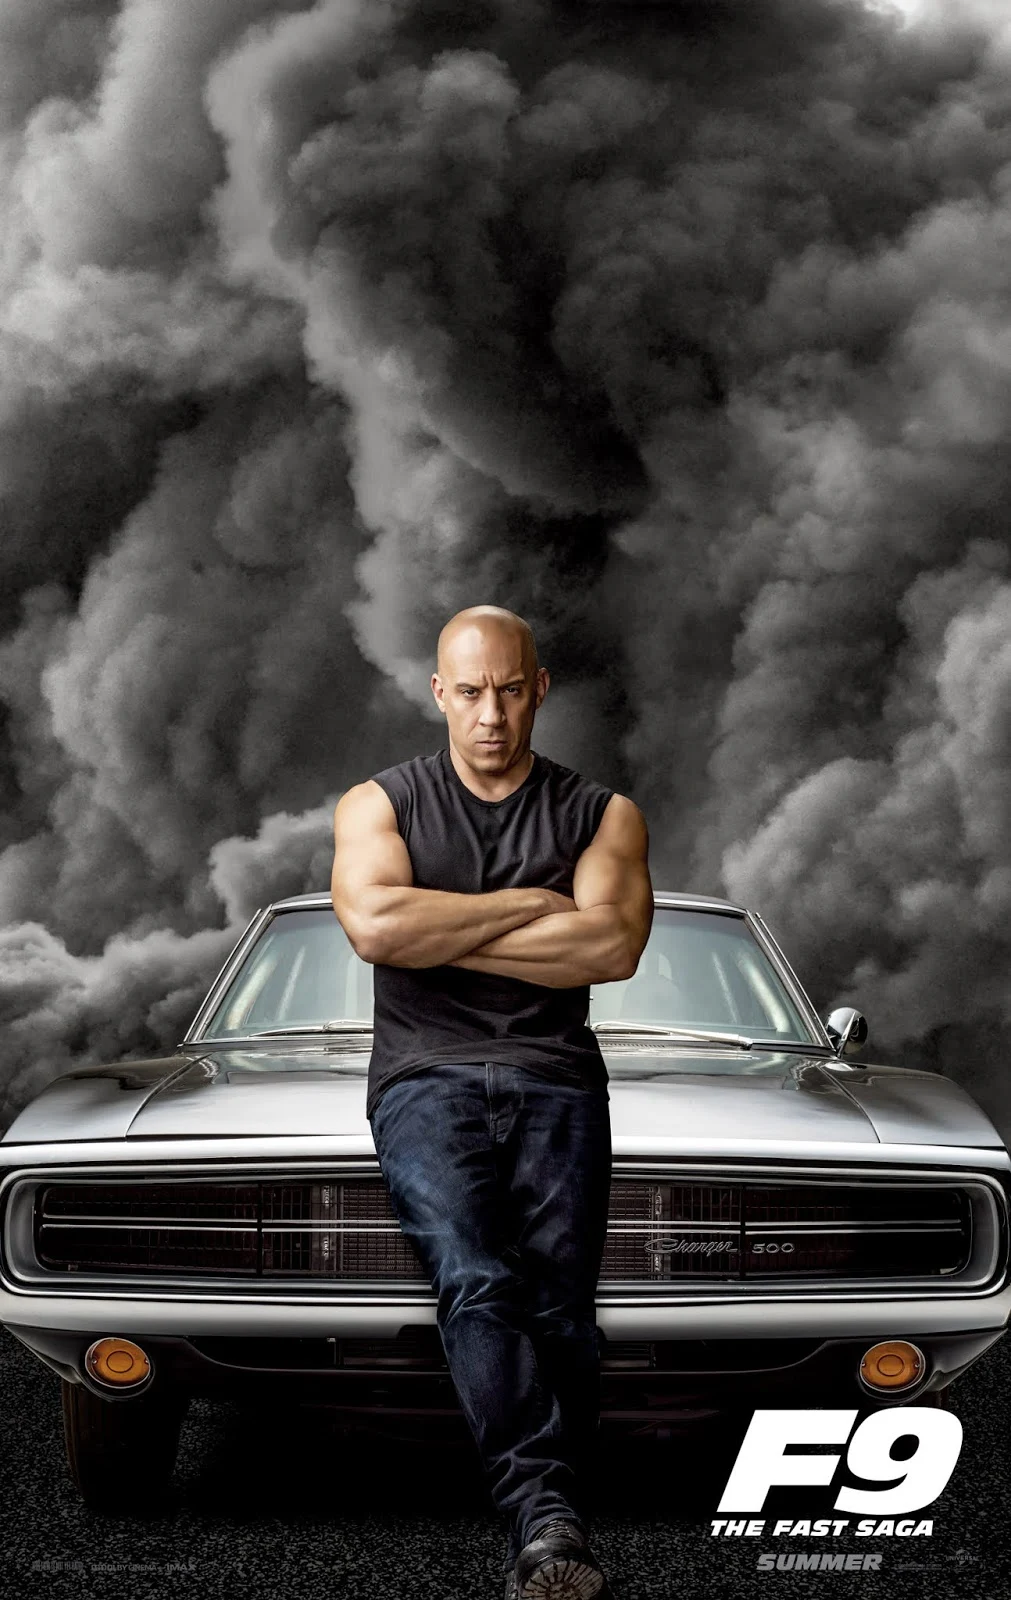 Vin Diesel - Fast and Furious 9